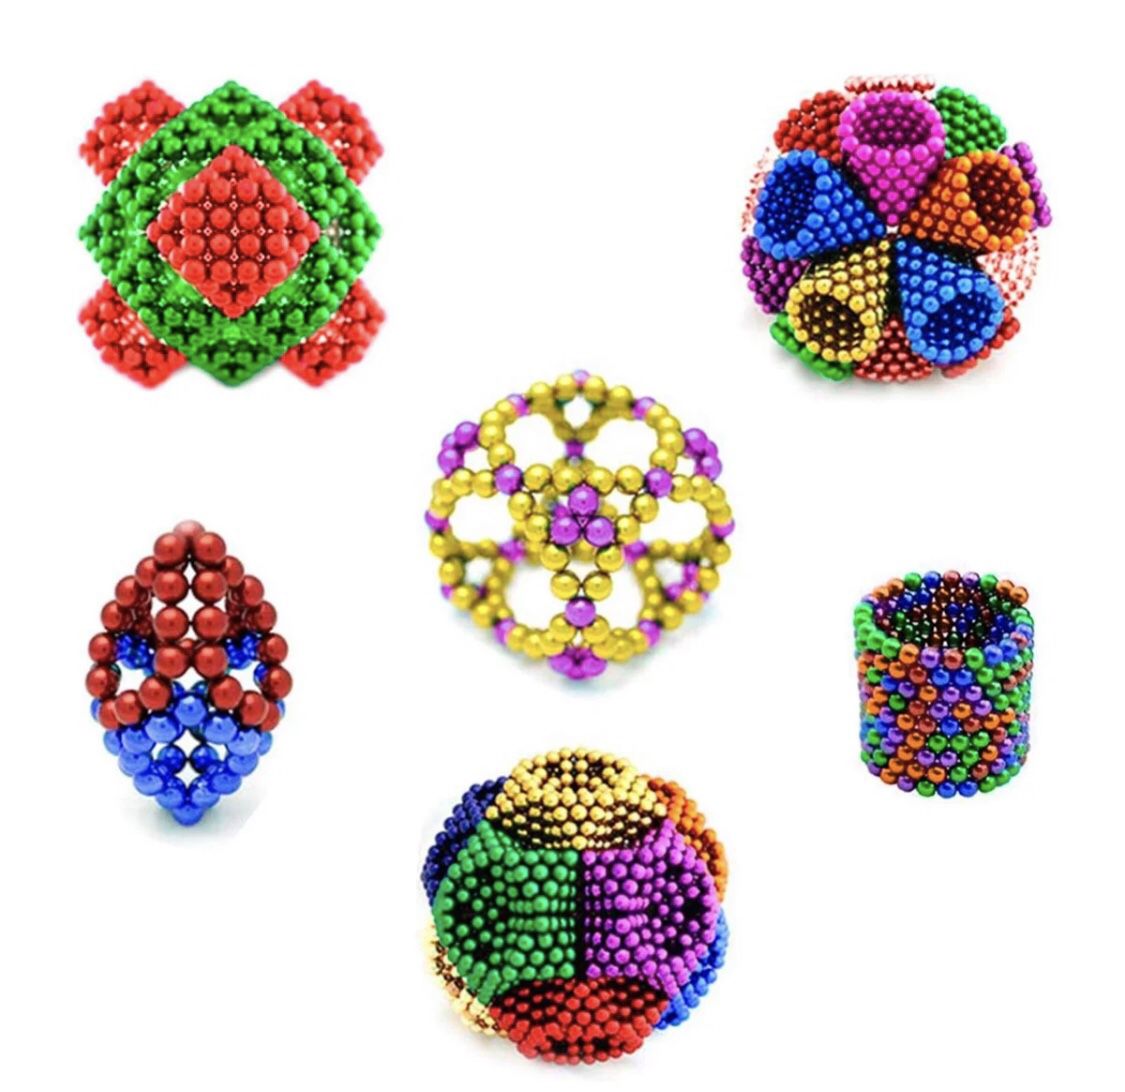 Yaranka 546Pcs Magnetic Balls-Best Stress/Anxiety Relief Toy Desk Toy Ch…